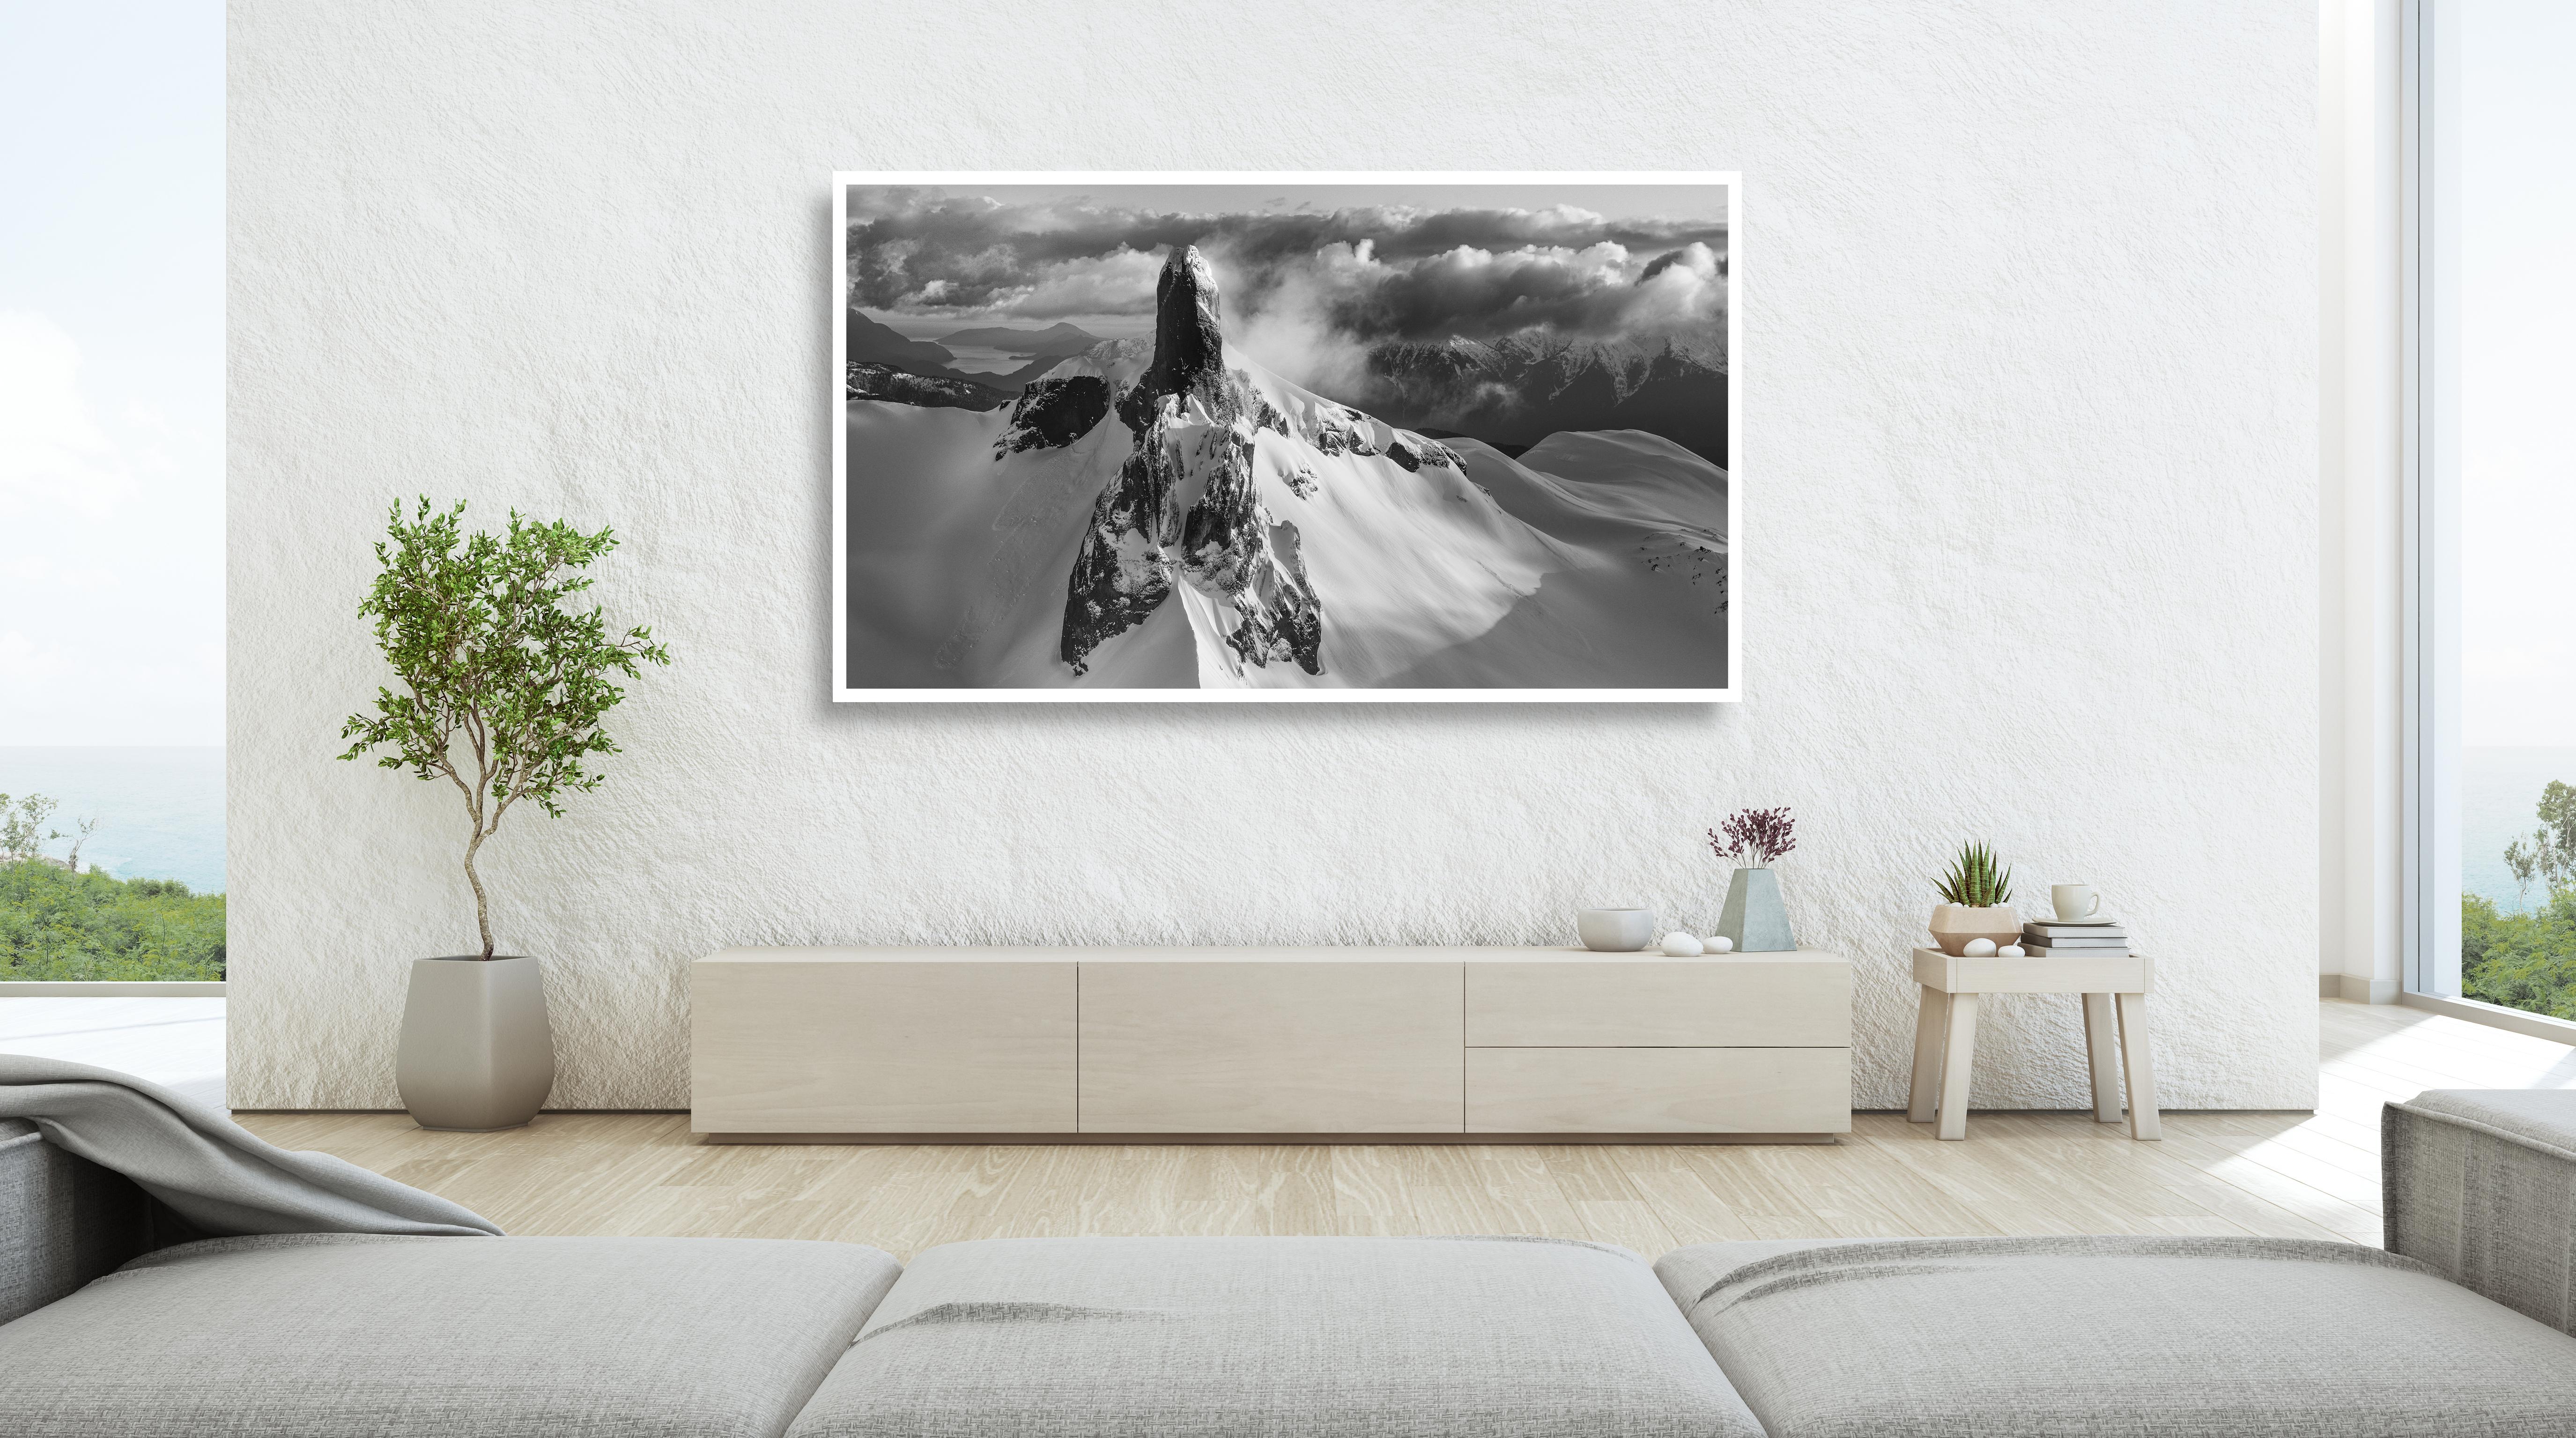 Black Tusk #50, Whistler, black and white, contemporary, landscape photograph - Photograph by Jussi Grznar 